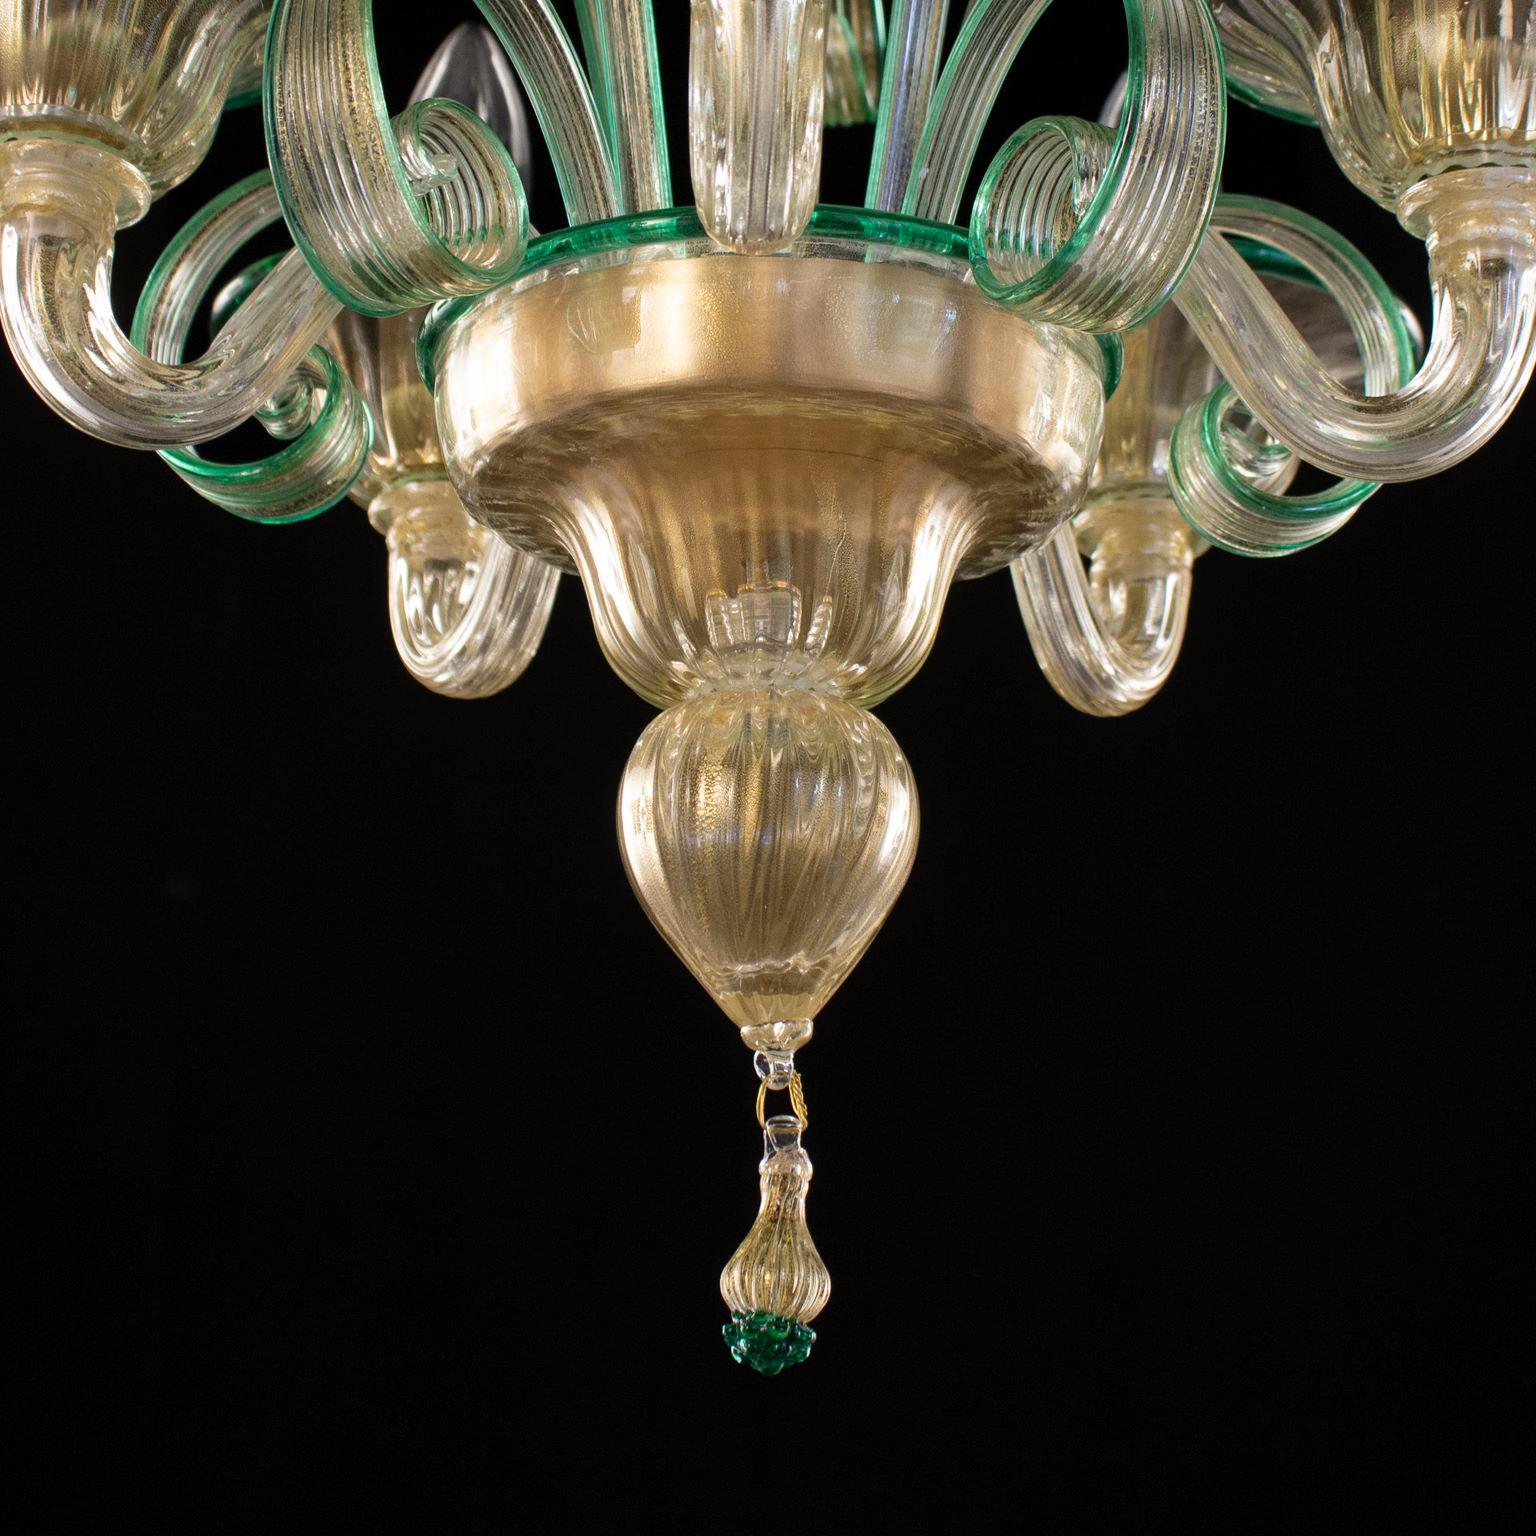 Chandelier 5 Arms Golden Leaf-green Artistic Murano Glass by Multiforme For Sale 1